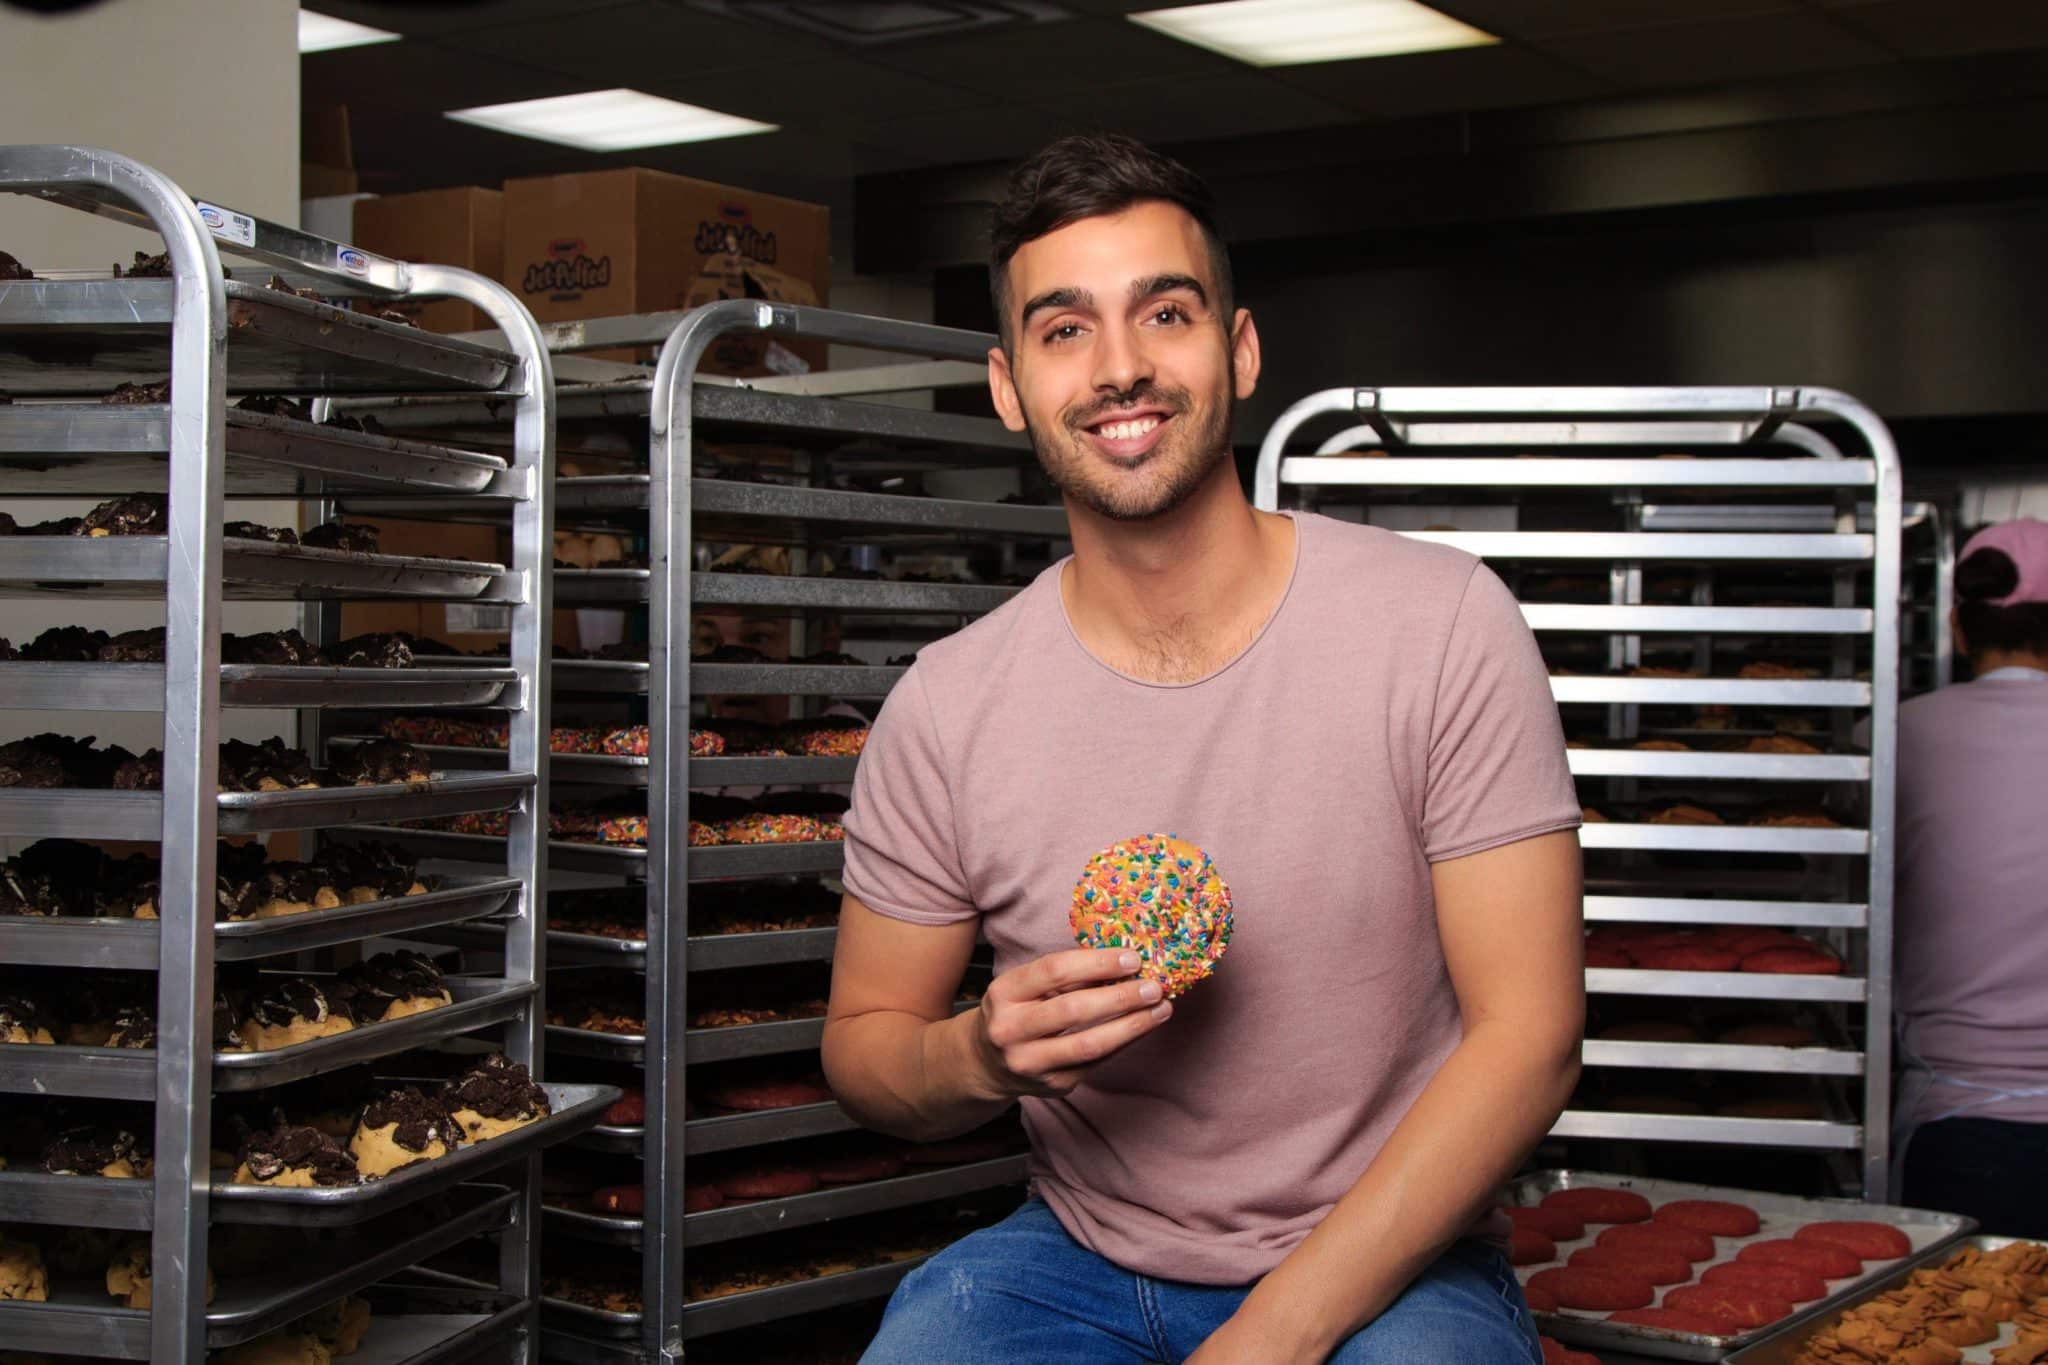 Night Owl Cookies founder and owner Andrew Gonzalez